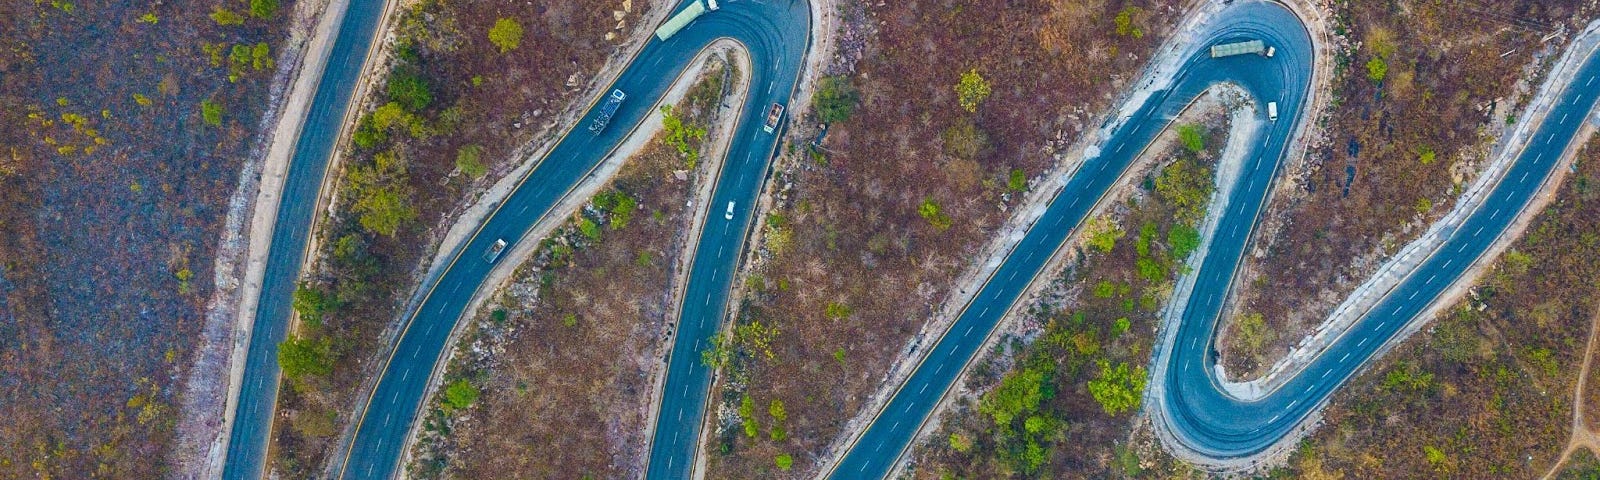 A long, winding, and unconventional road as seen from high above